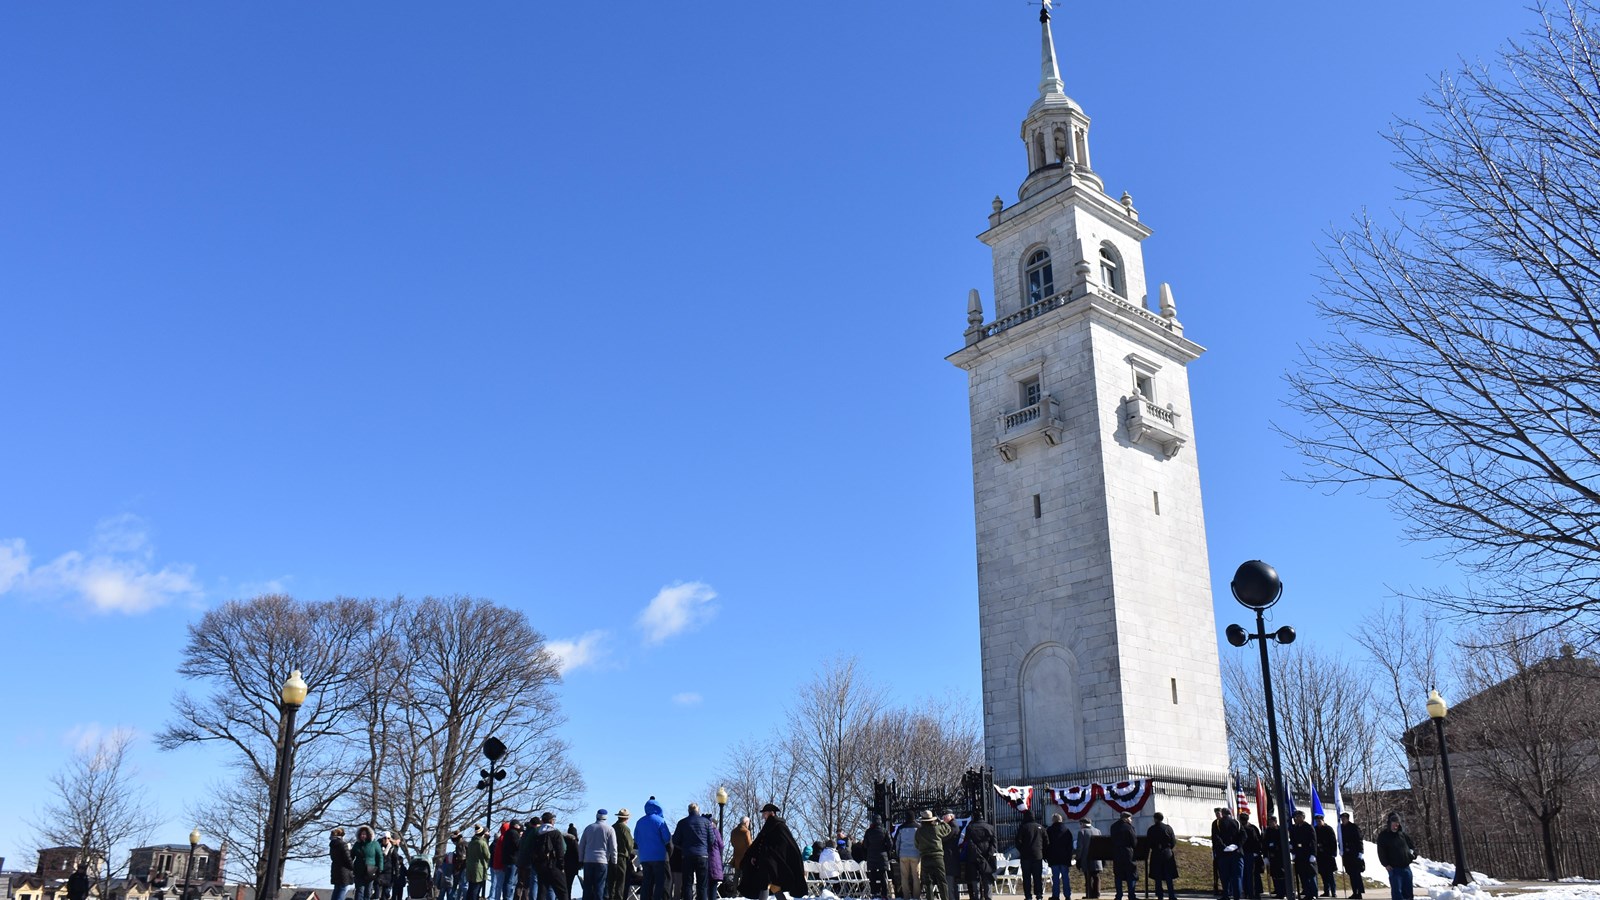 People standing around Dorchester Heights Monument. Trees are bare and ground has light snow.